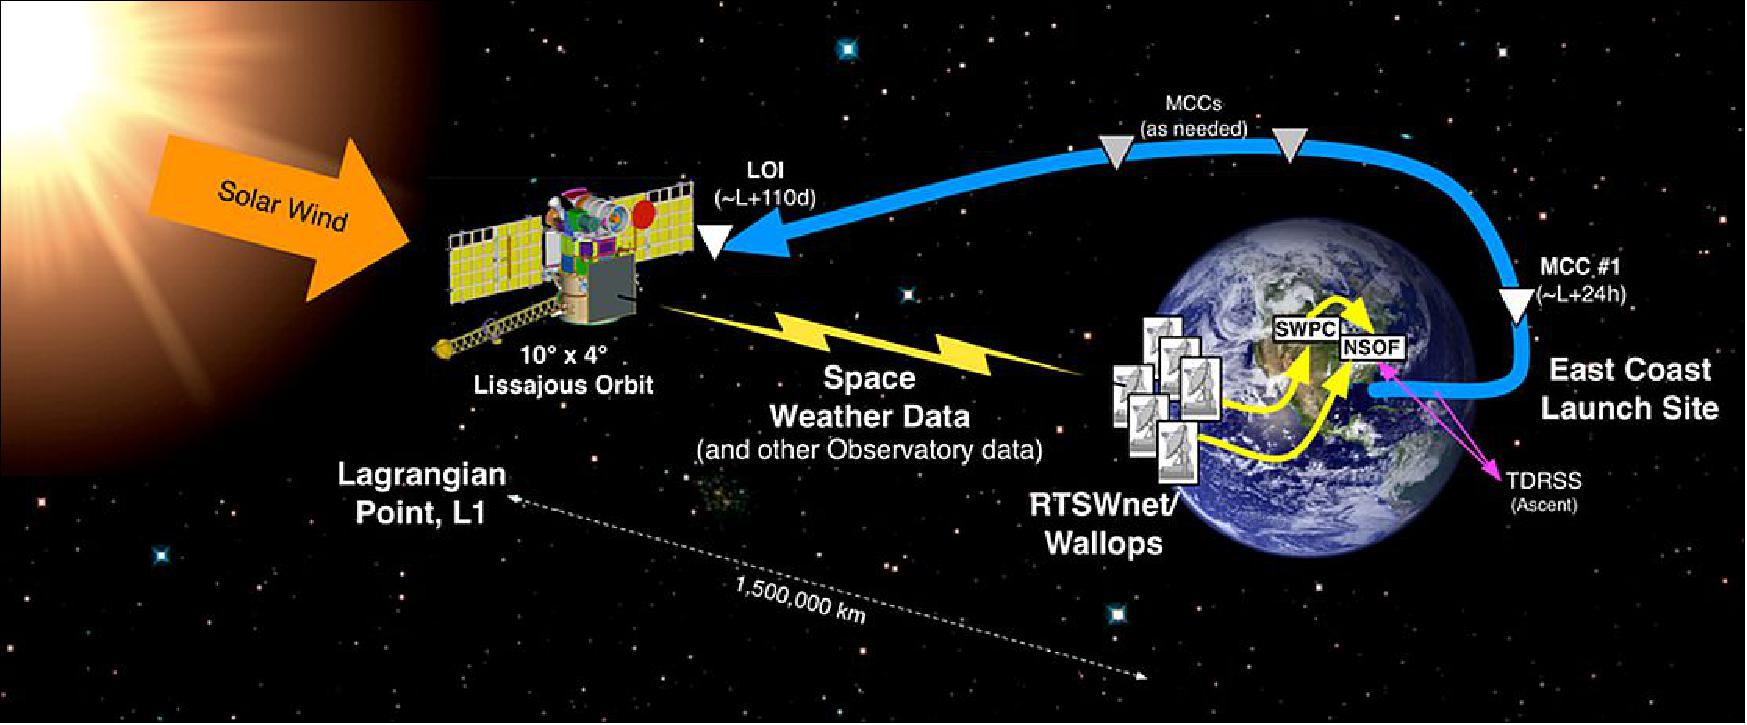 Figure 7: Artist's illustration of the DSCOVR spacecraft at L1 (image credit: NOAA) 28)